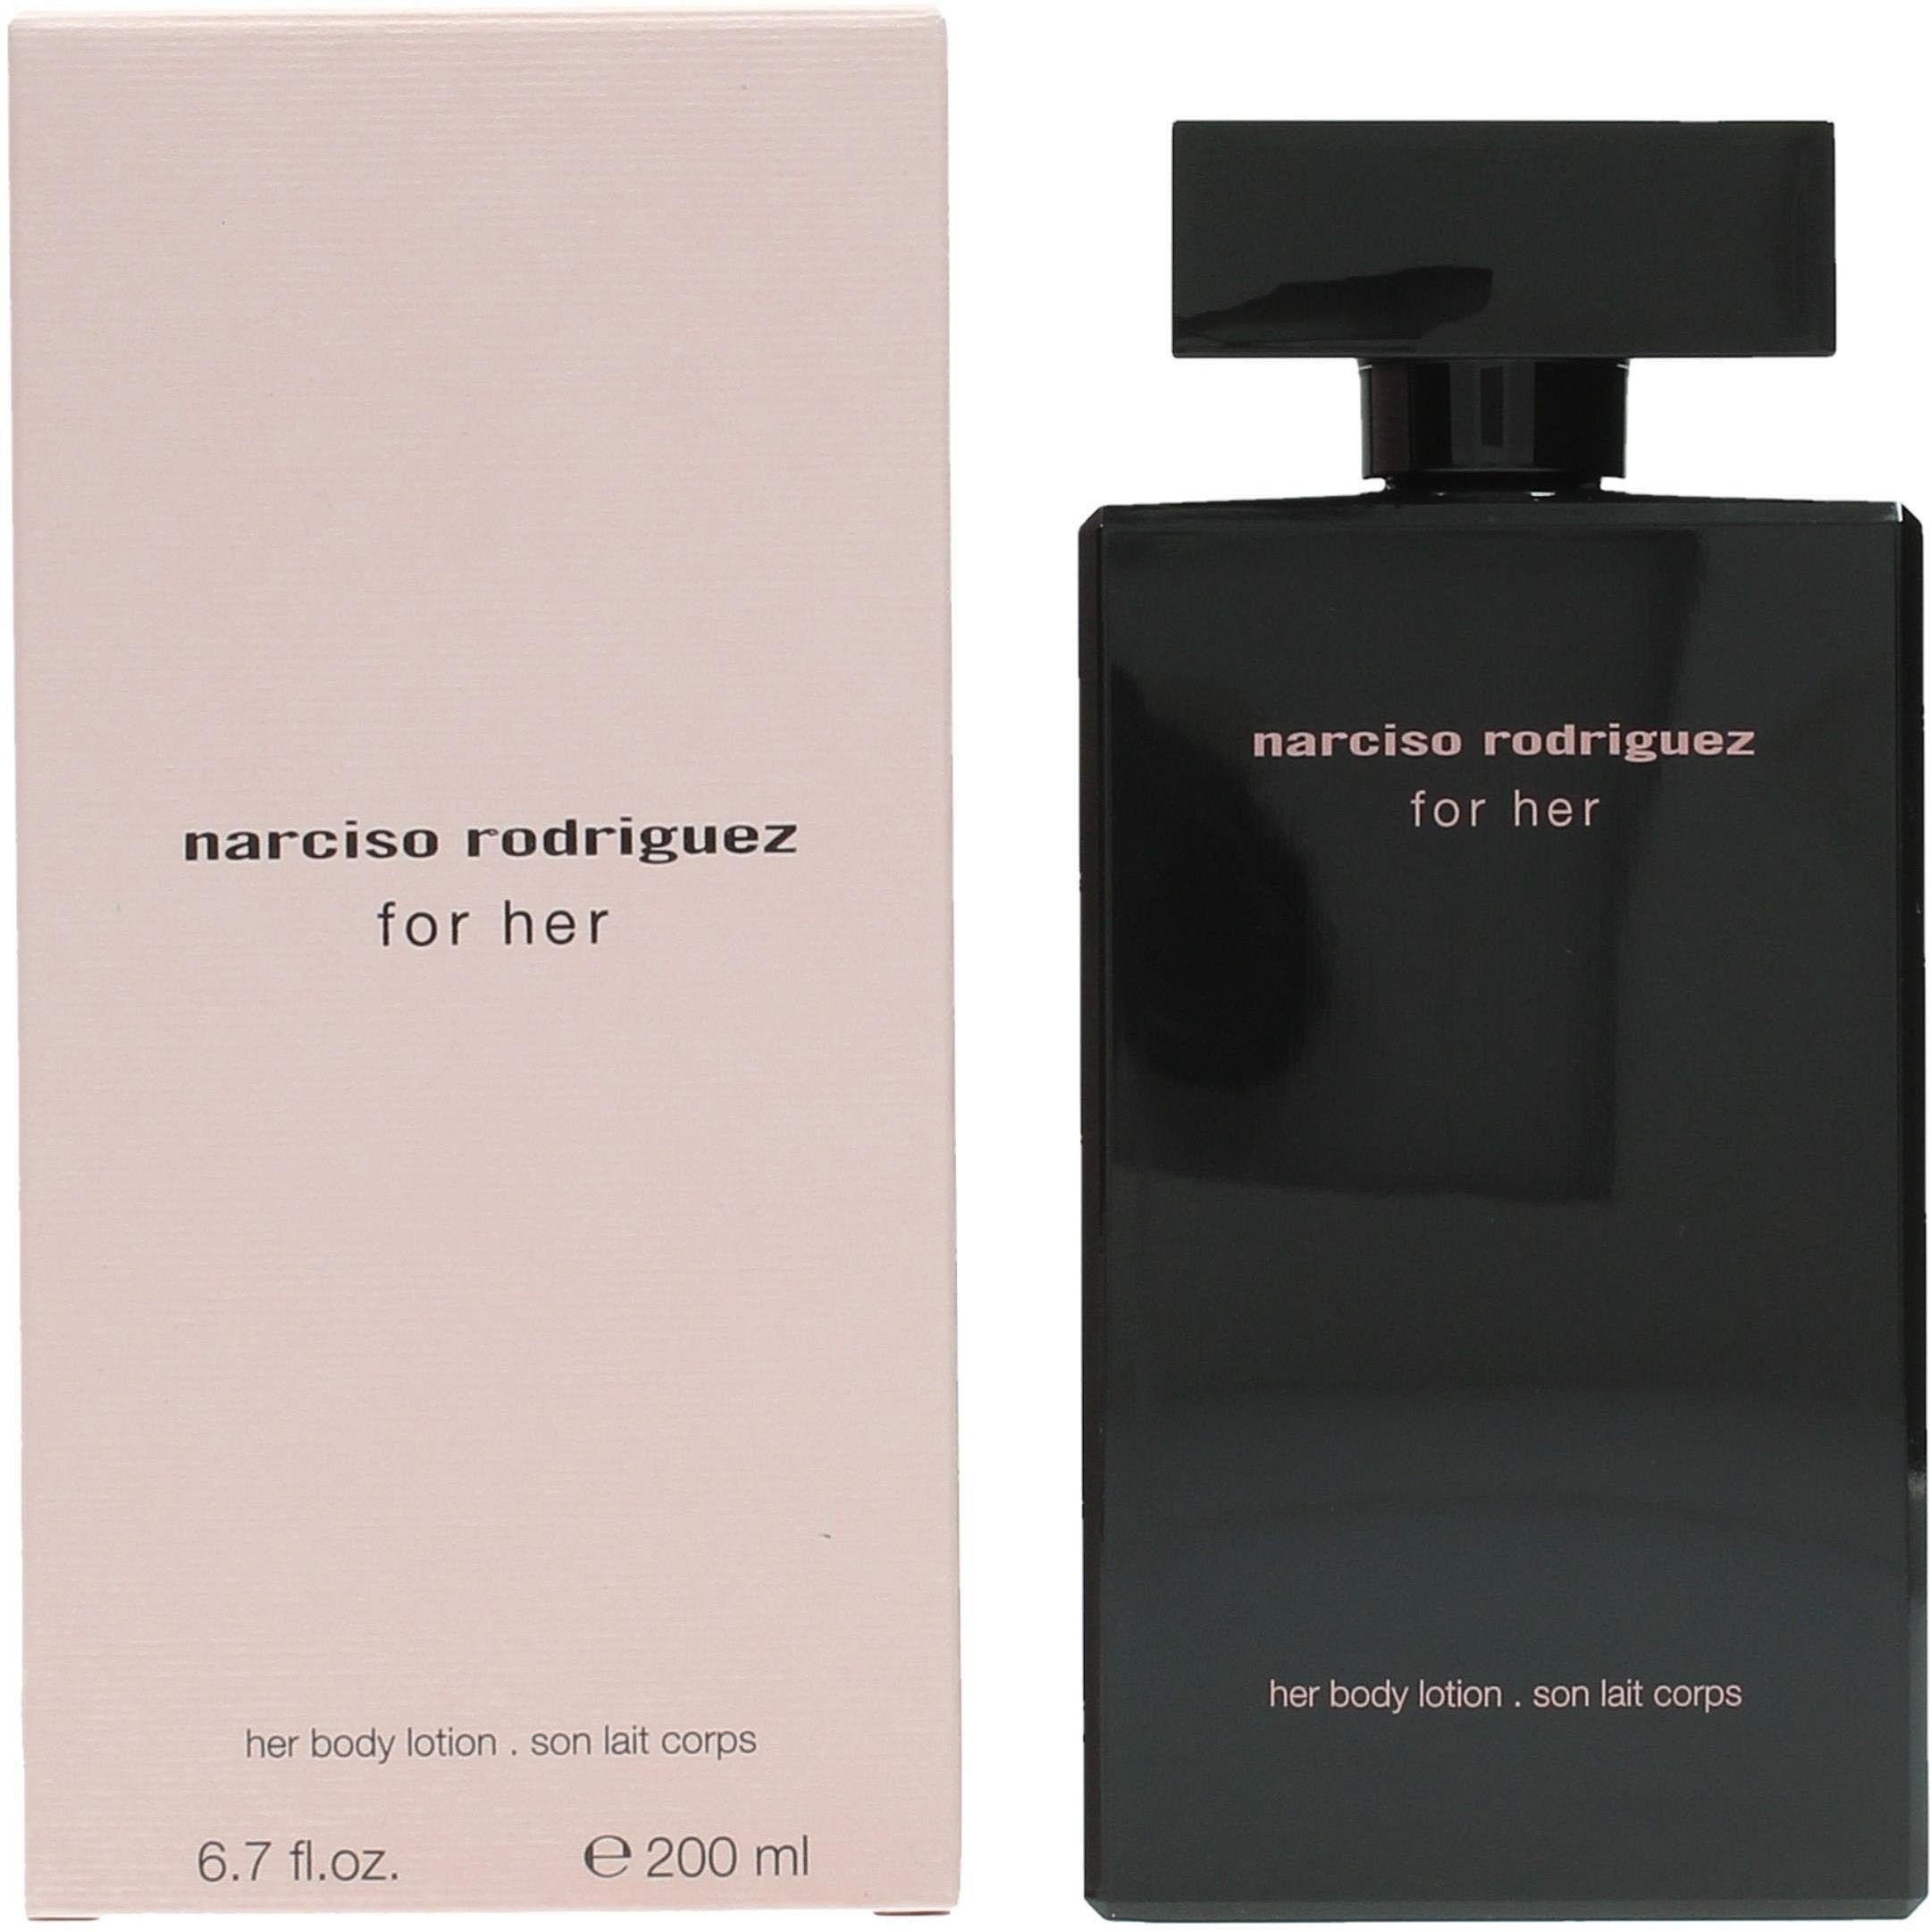 For narciso rodriguez Bodylotion Her